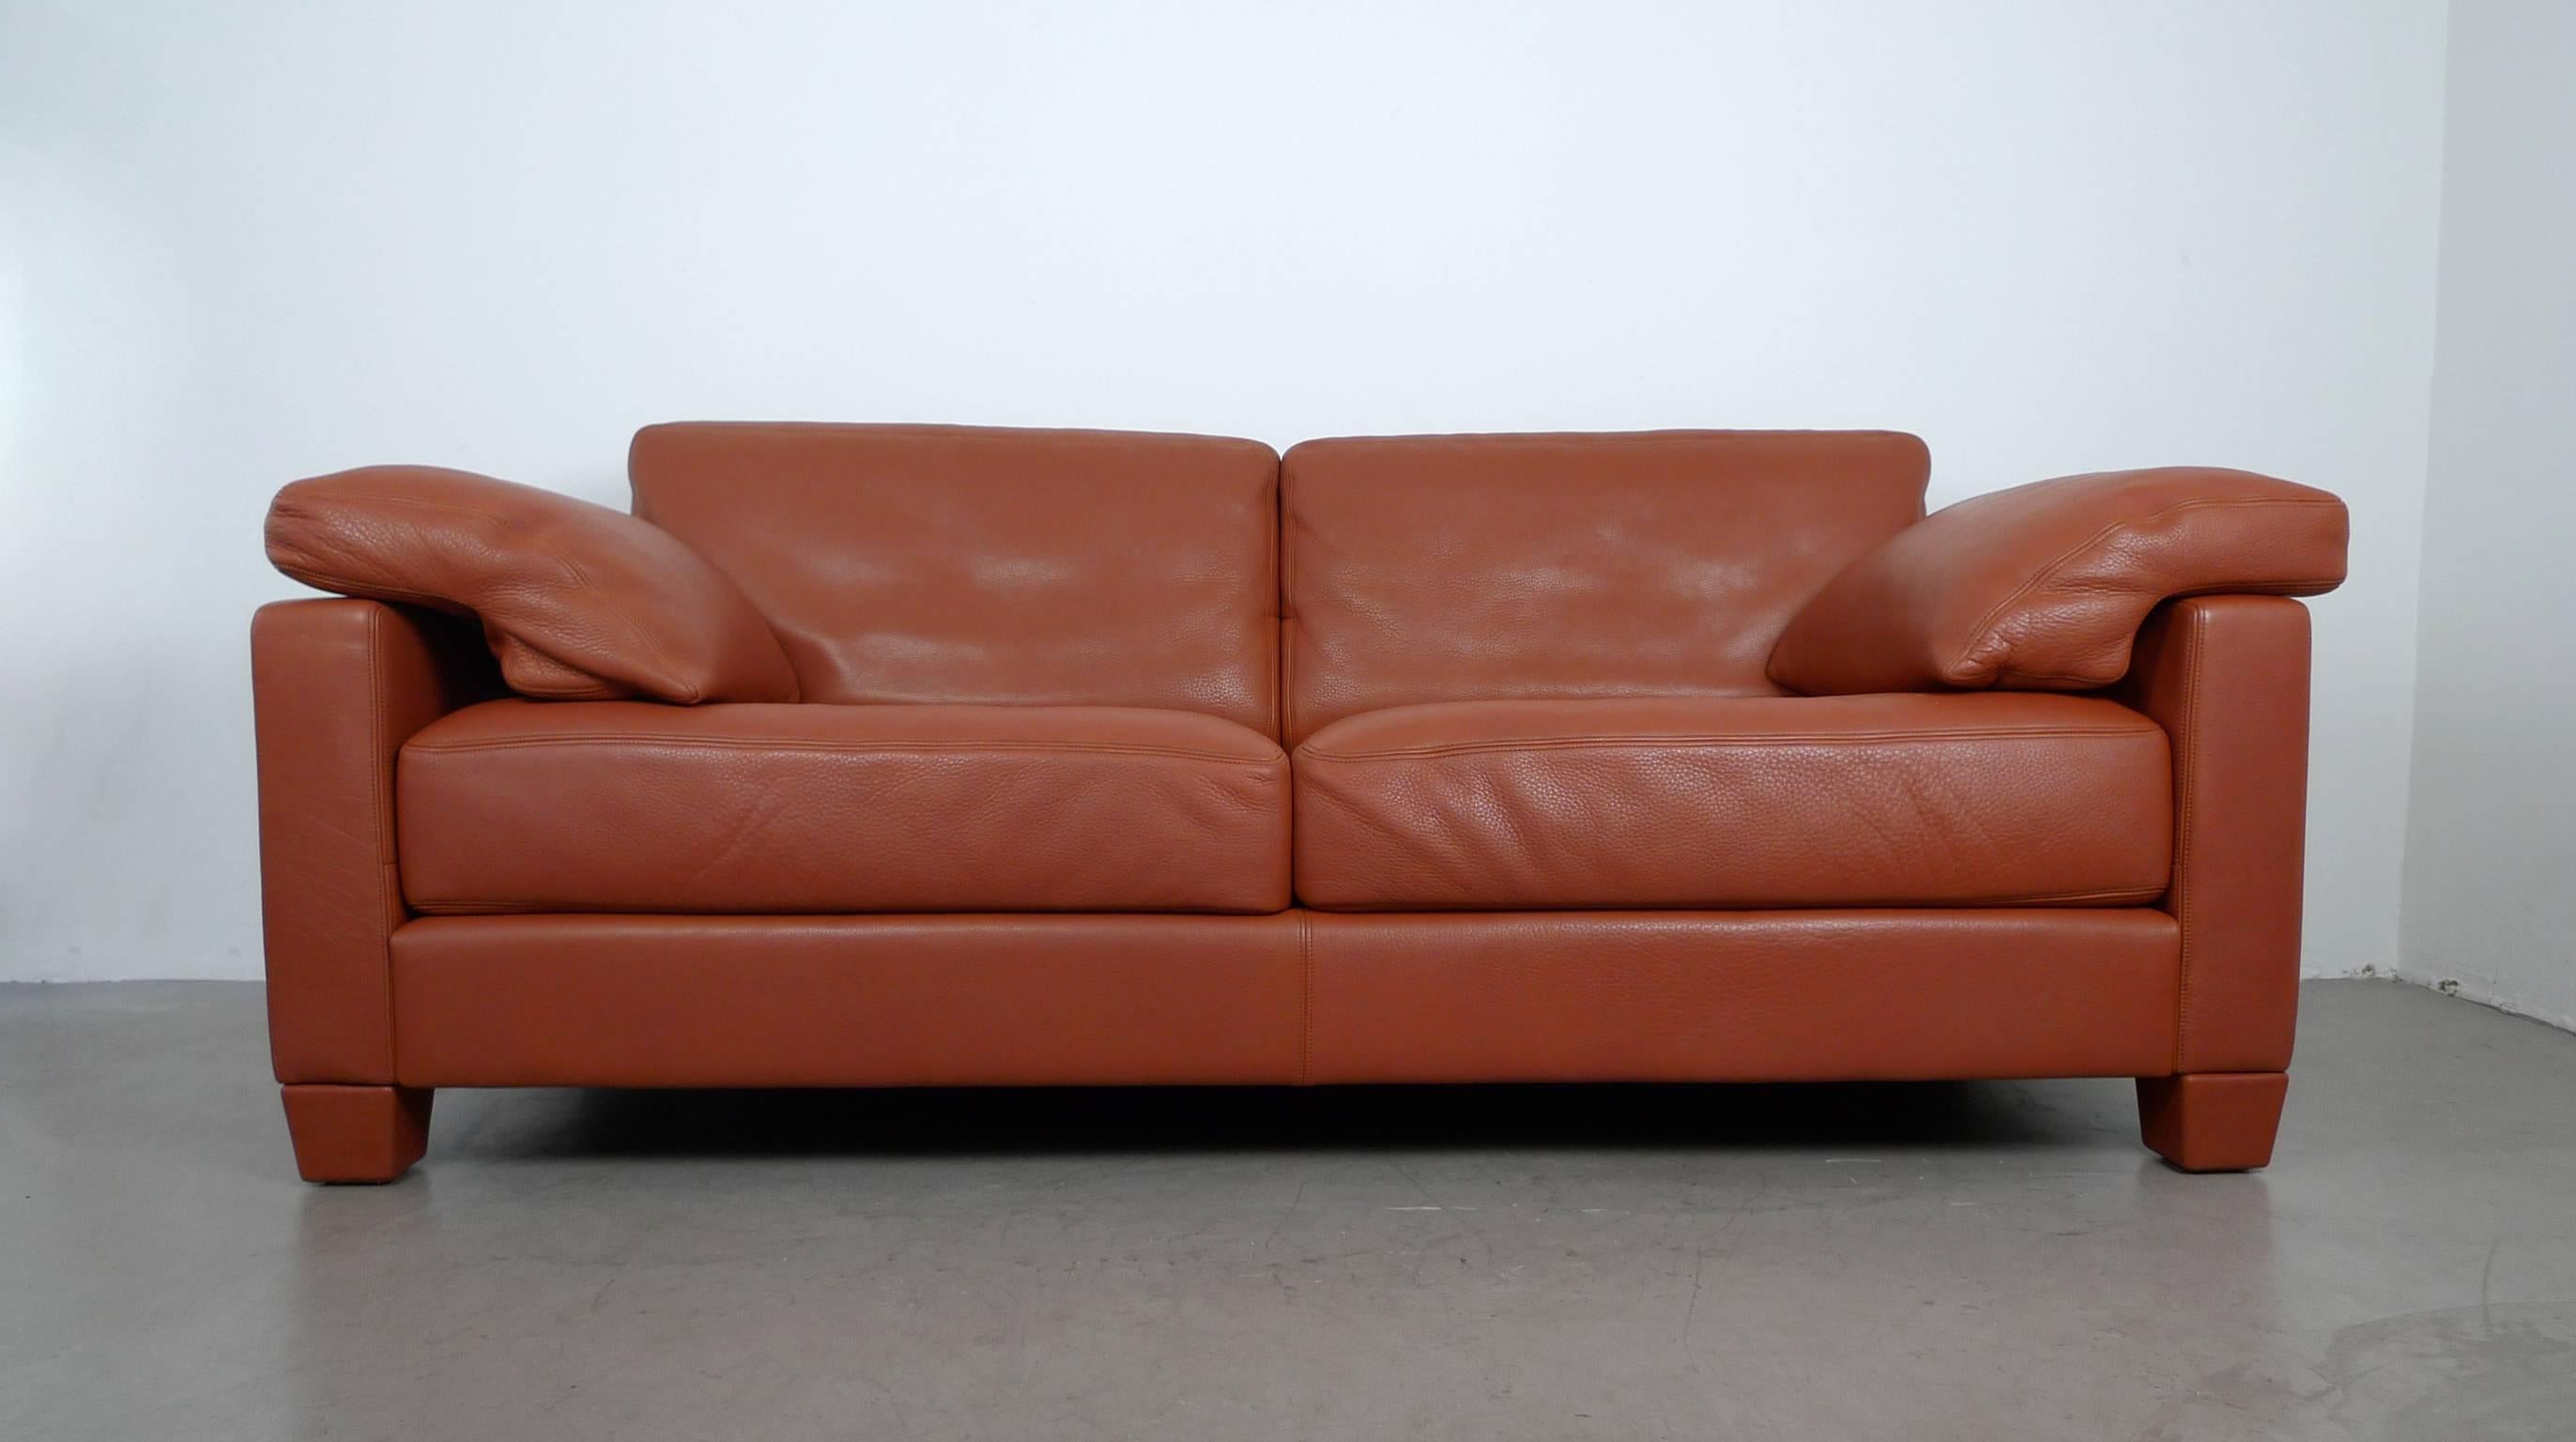 The 2 1/2-seat sofa model DS-17/123 was produced by Swiss manufacturer De Sede. The design was created by the In-House Design team in 1989.
Structure, feet, and cushions are upholstered in thick cognac-colored leather, which shows a pronounced